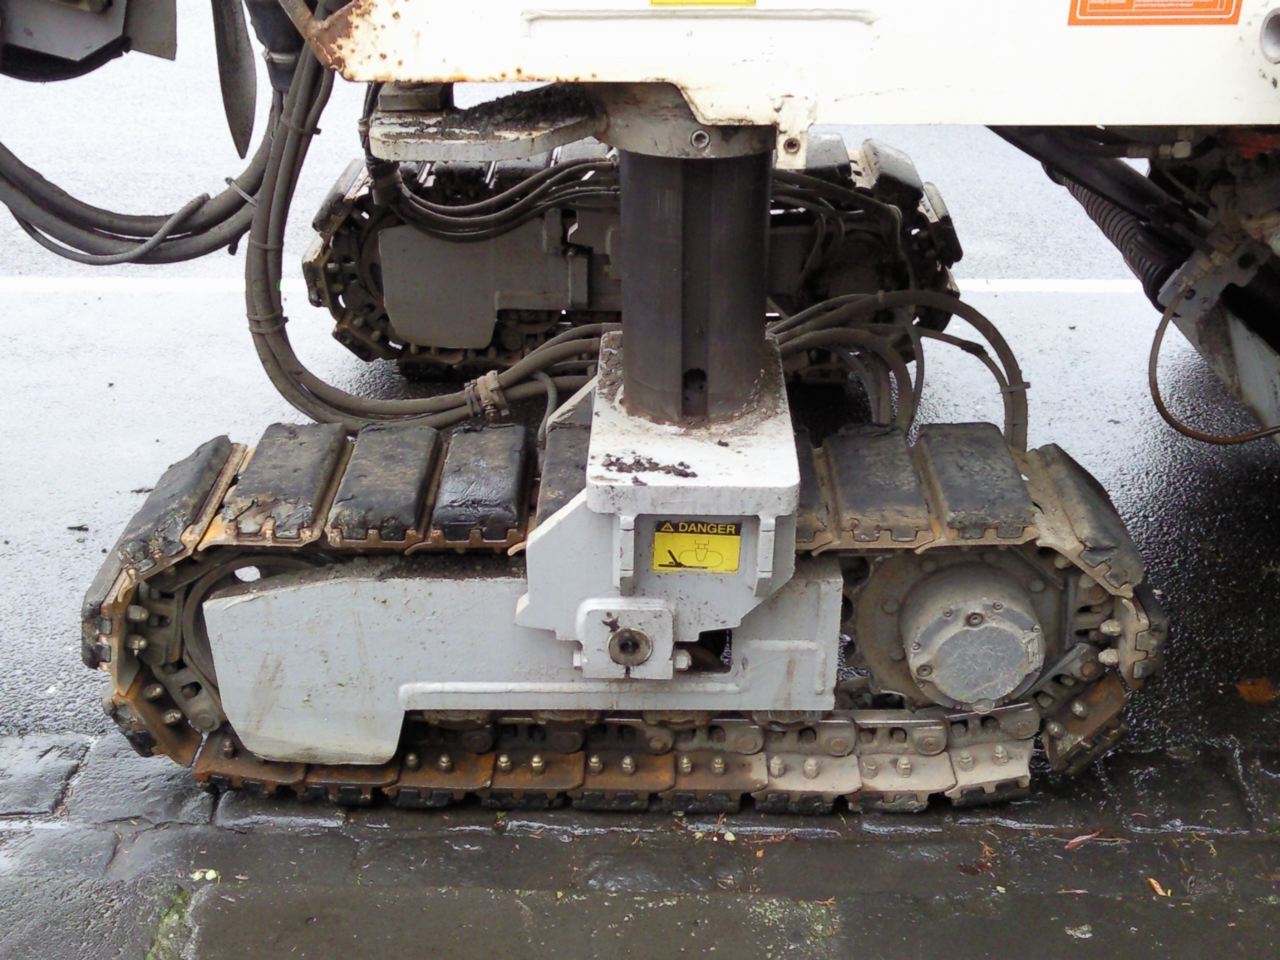 the back end of a vehicle with its tracks open